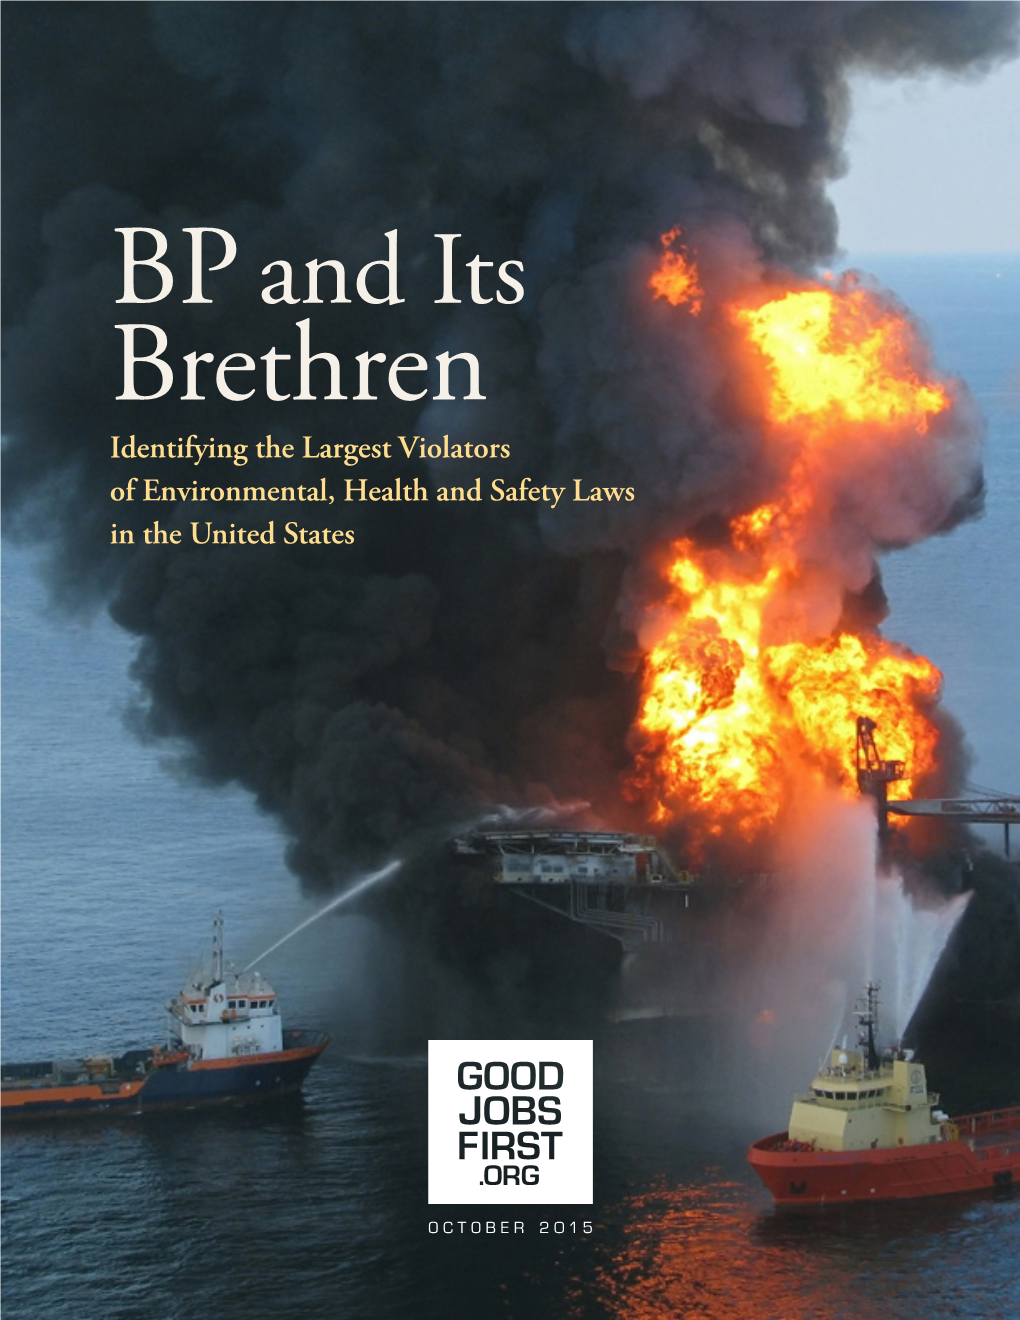 BP and Its Brethren Identifying the Largest Violators of Environmental, Health and Safety Laws in the United States